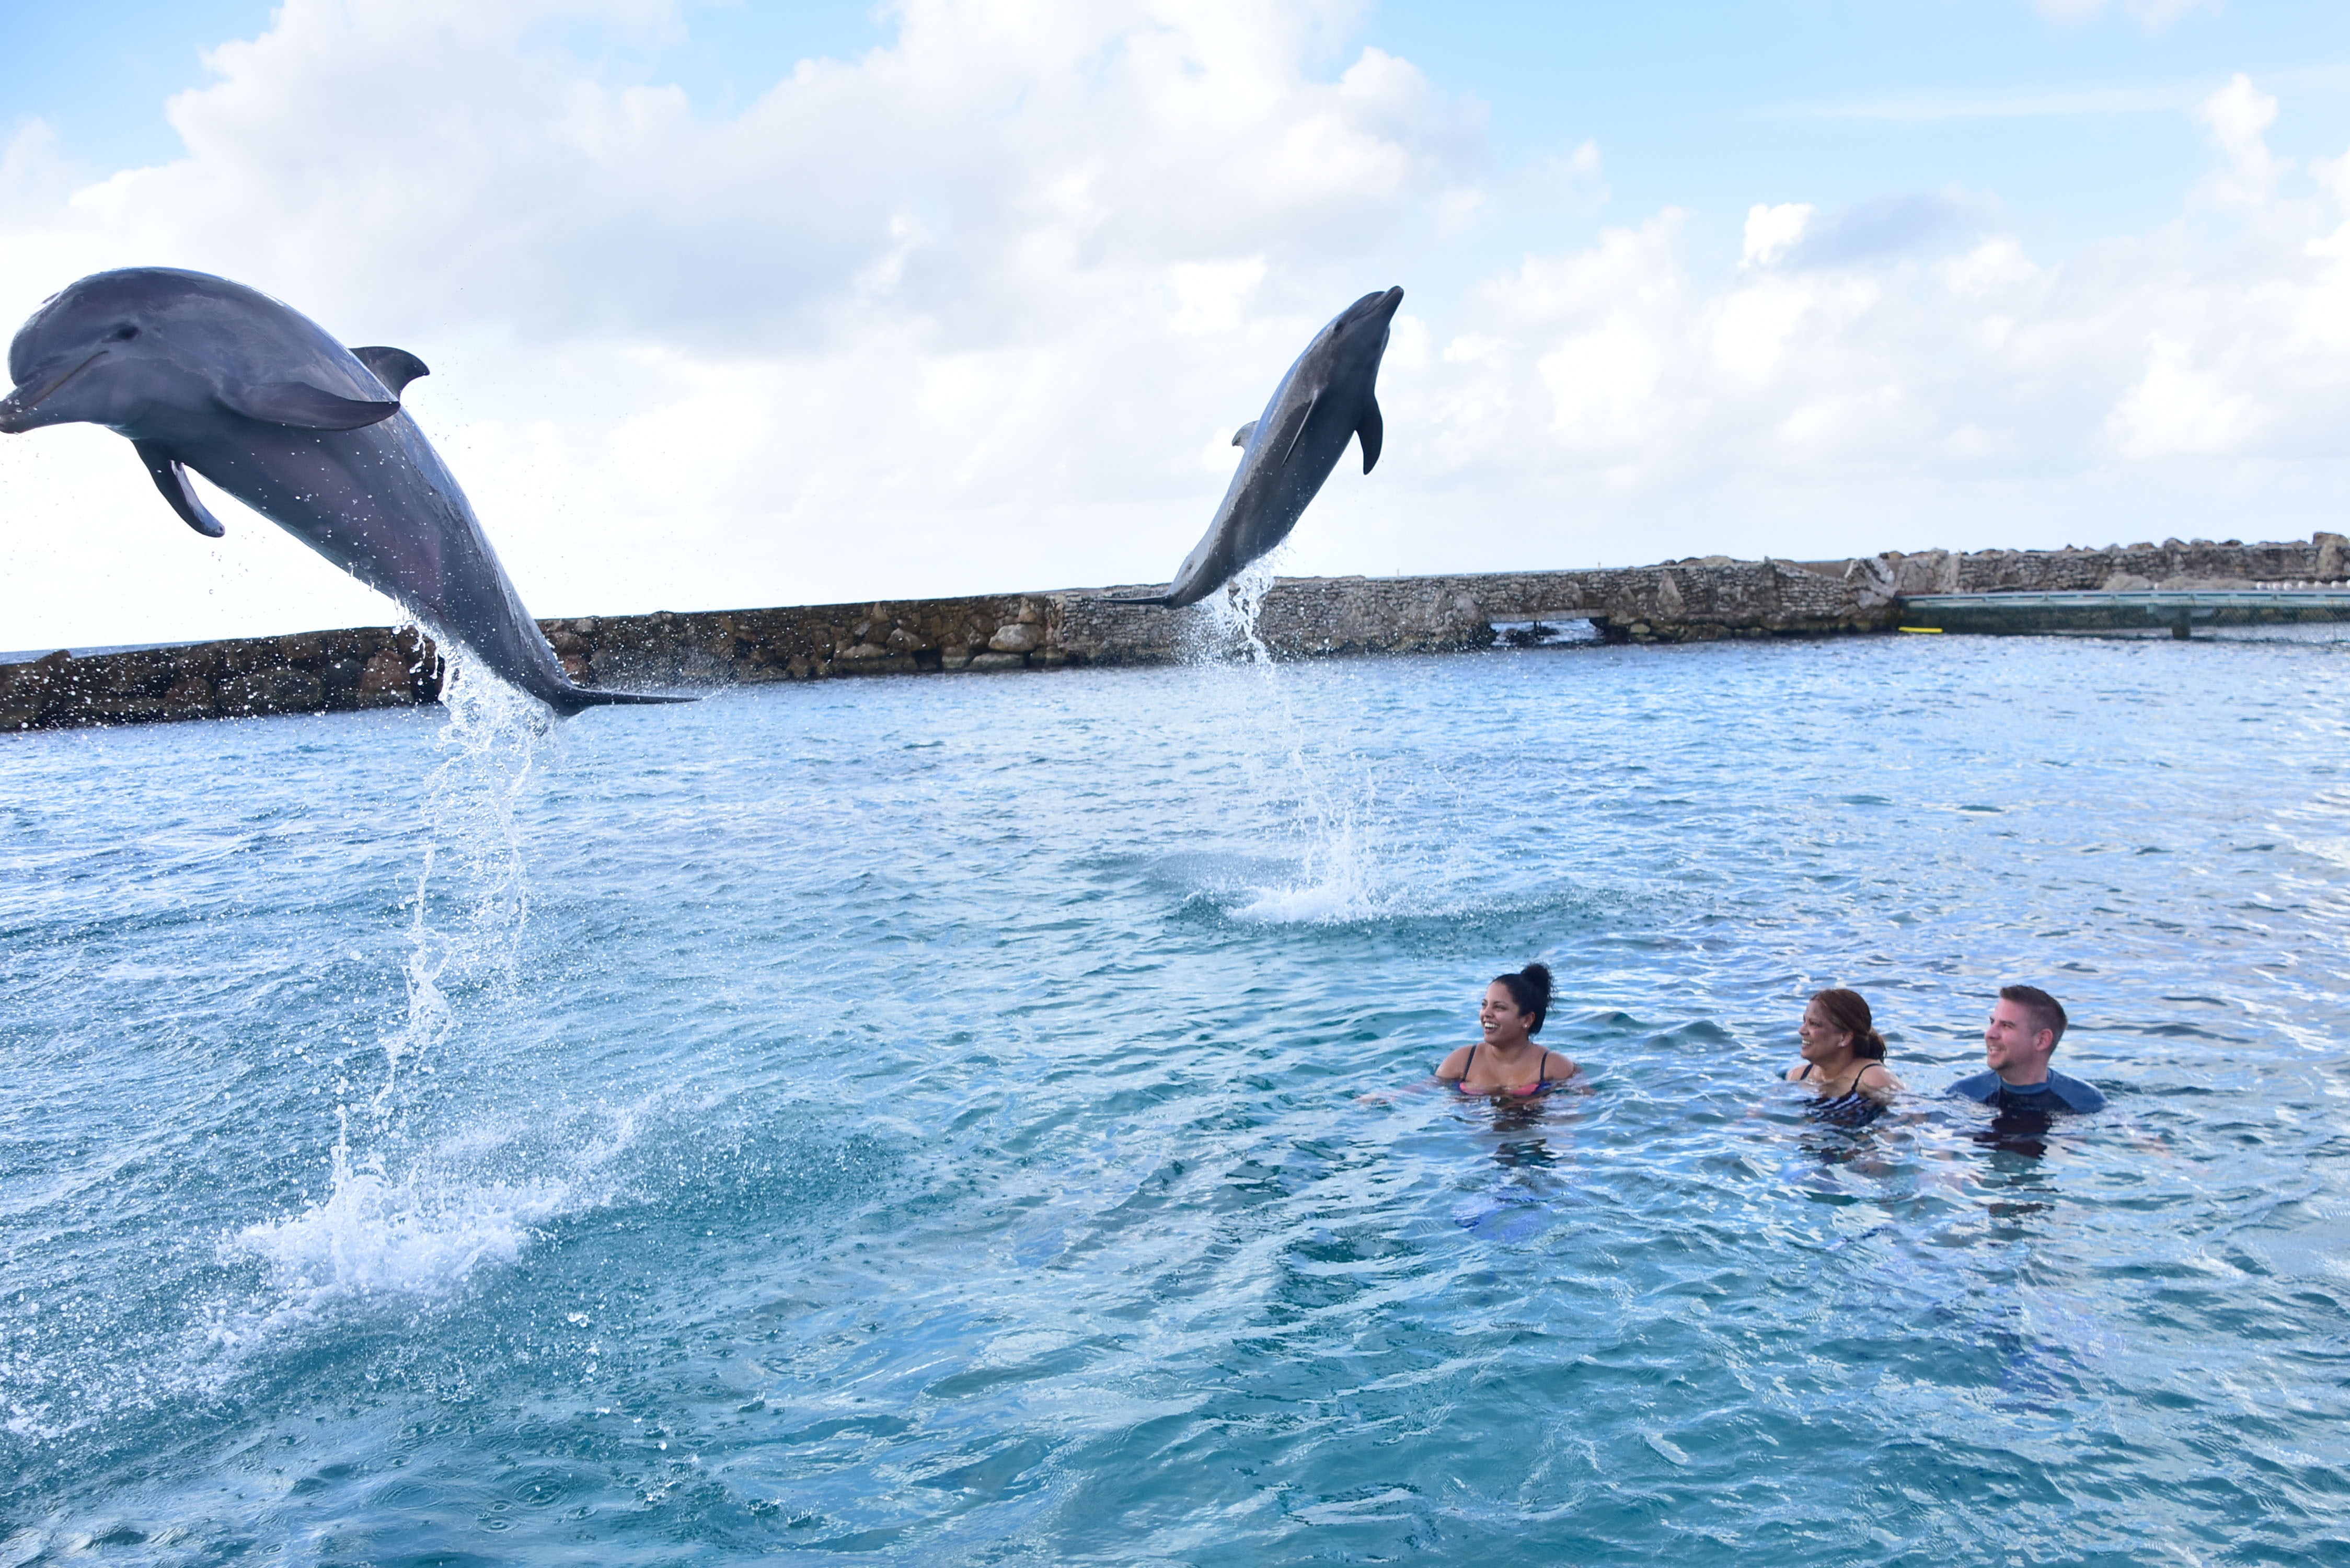 Our amazing experience at Dolphin Academy Curacao